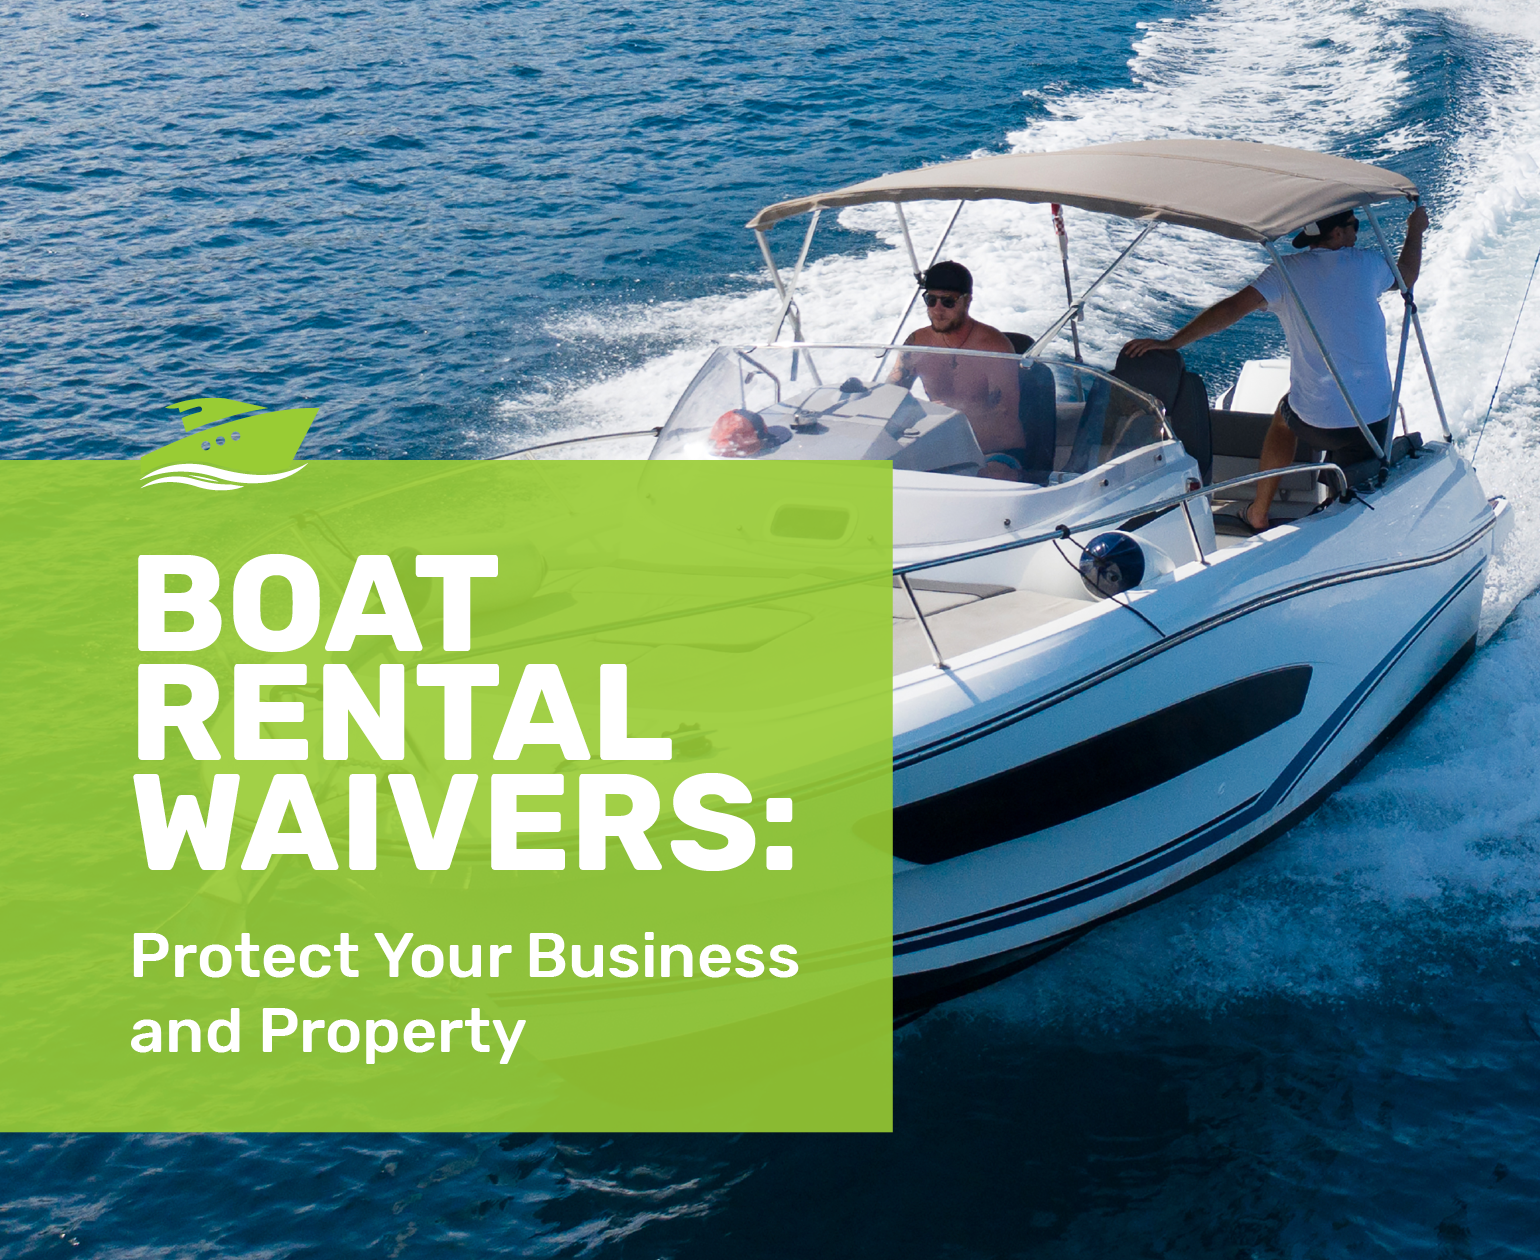 Boat Rental Waivers: Protect Your Business and Property